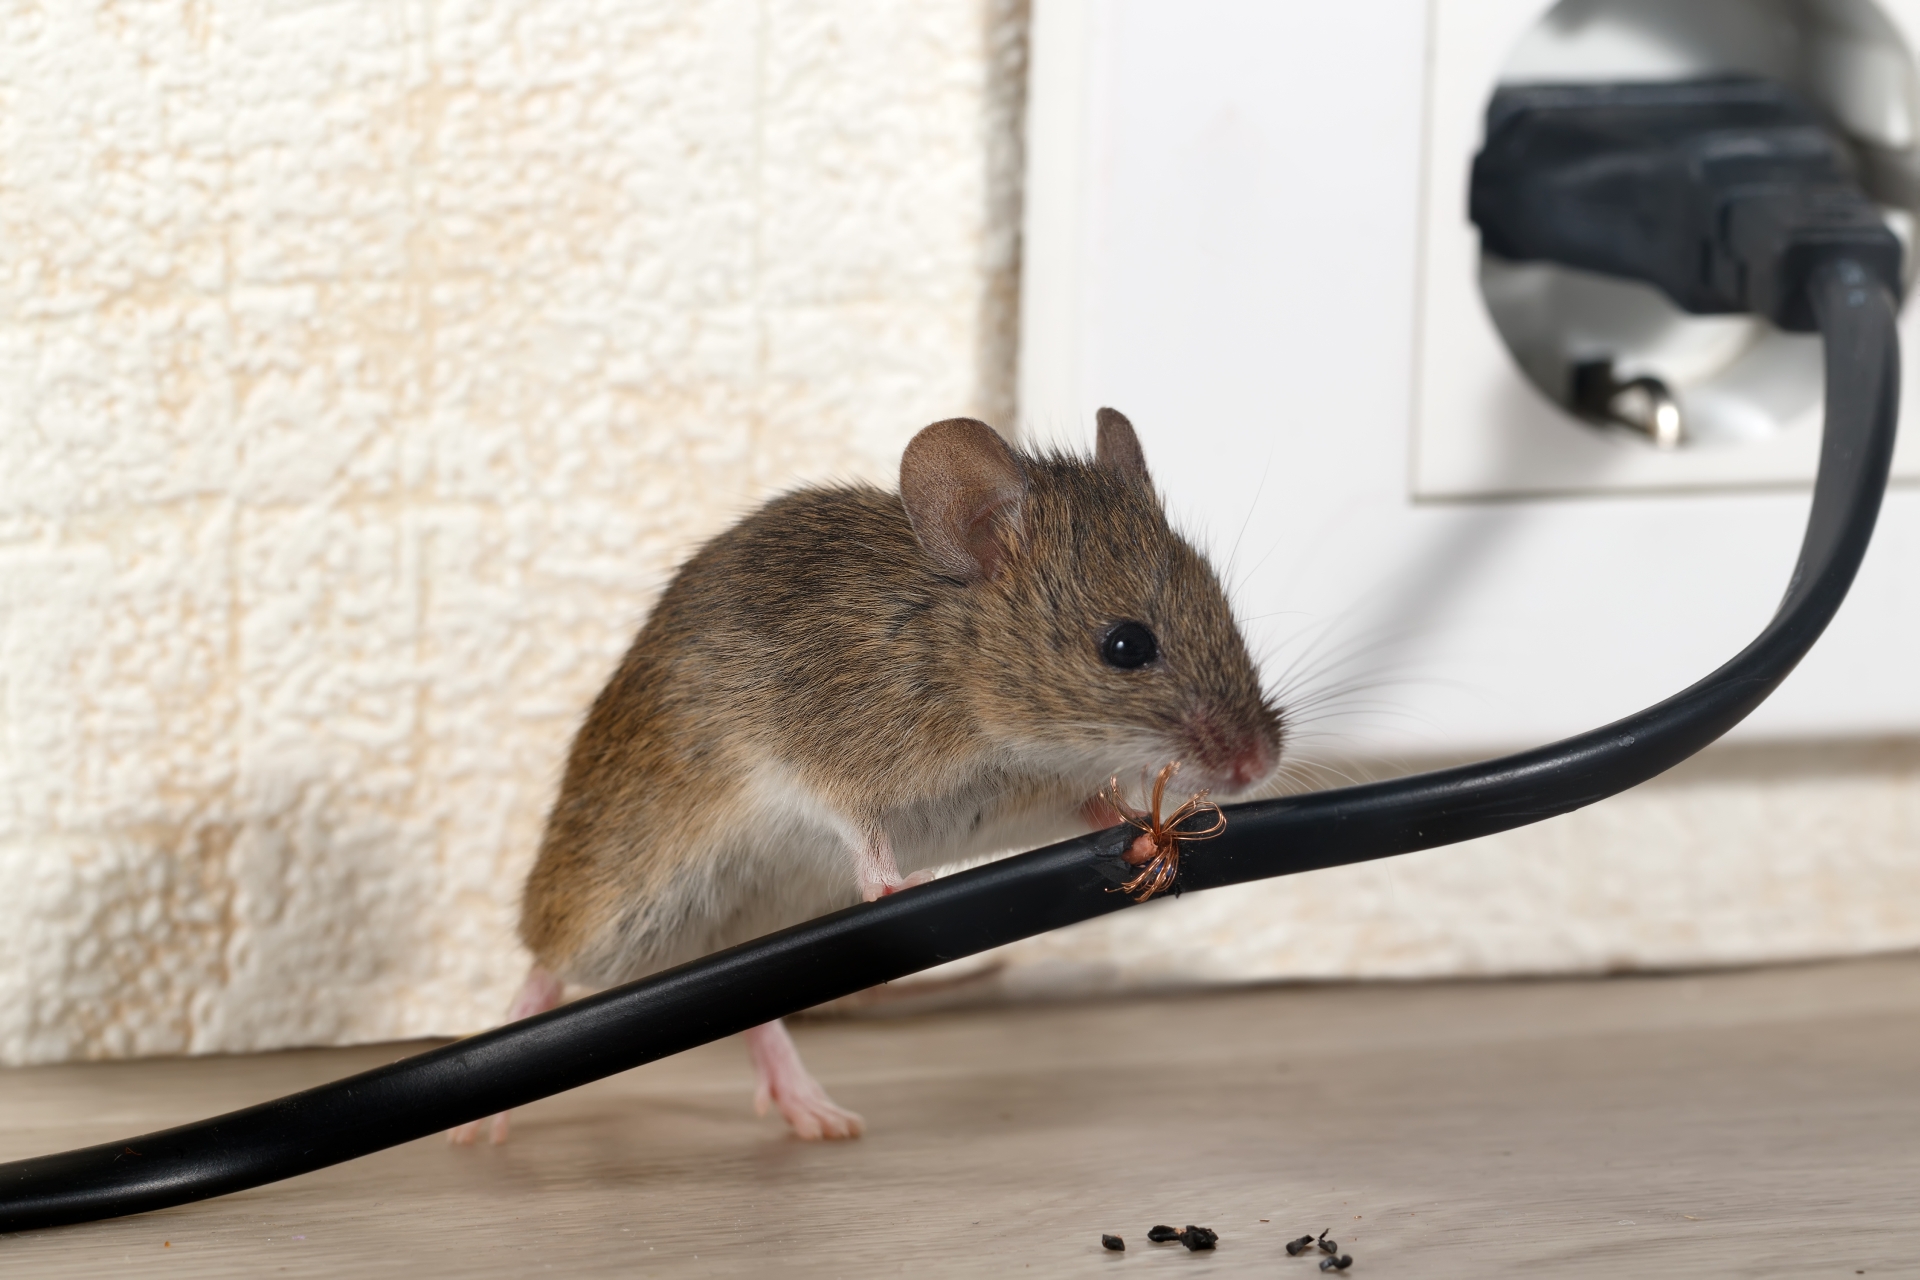 Mice Infestation, Pest Control in Shoreditch, E2. Call Now 020 8166 9746